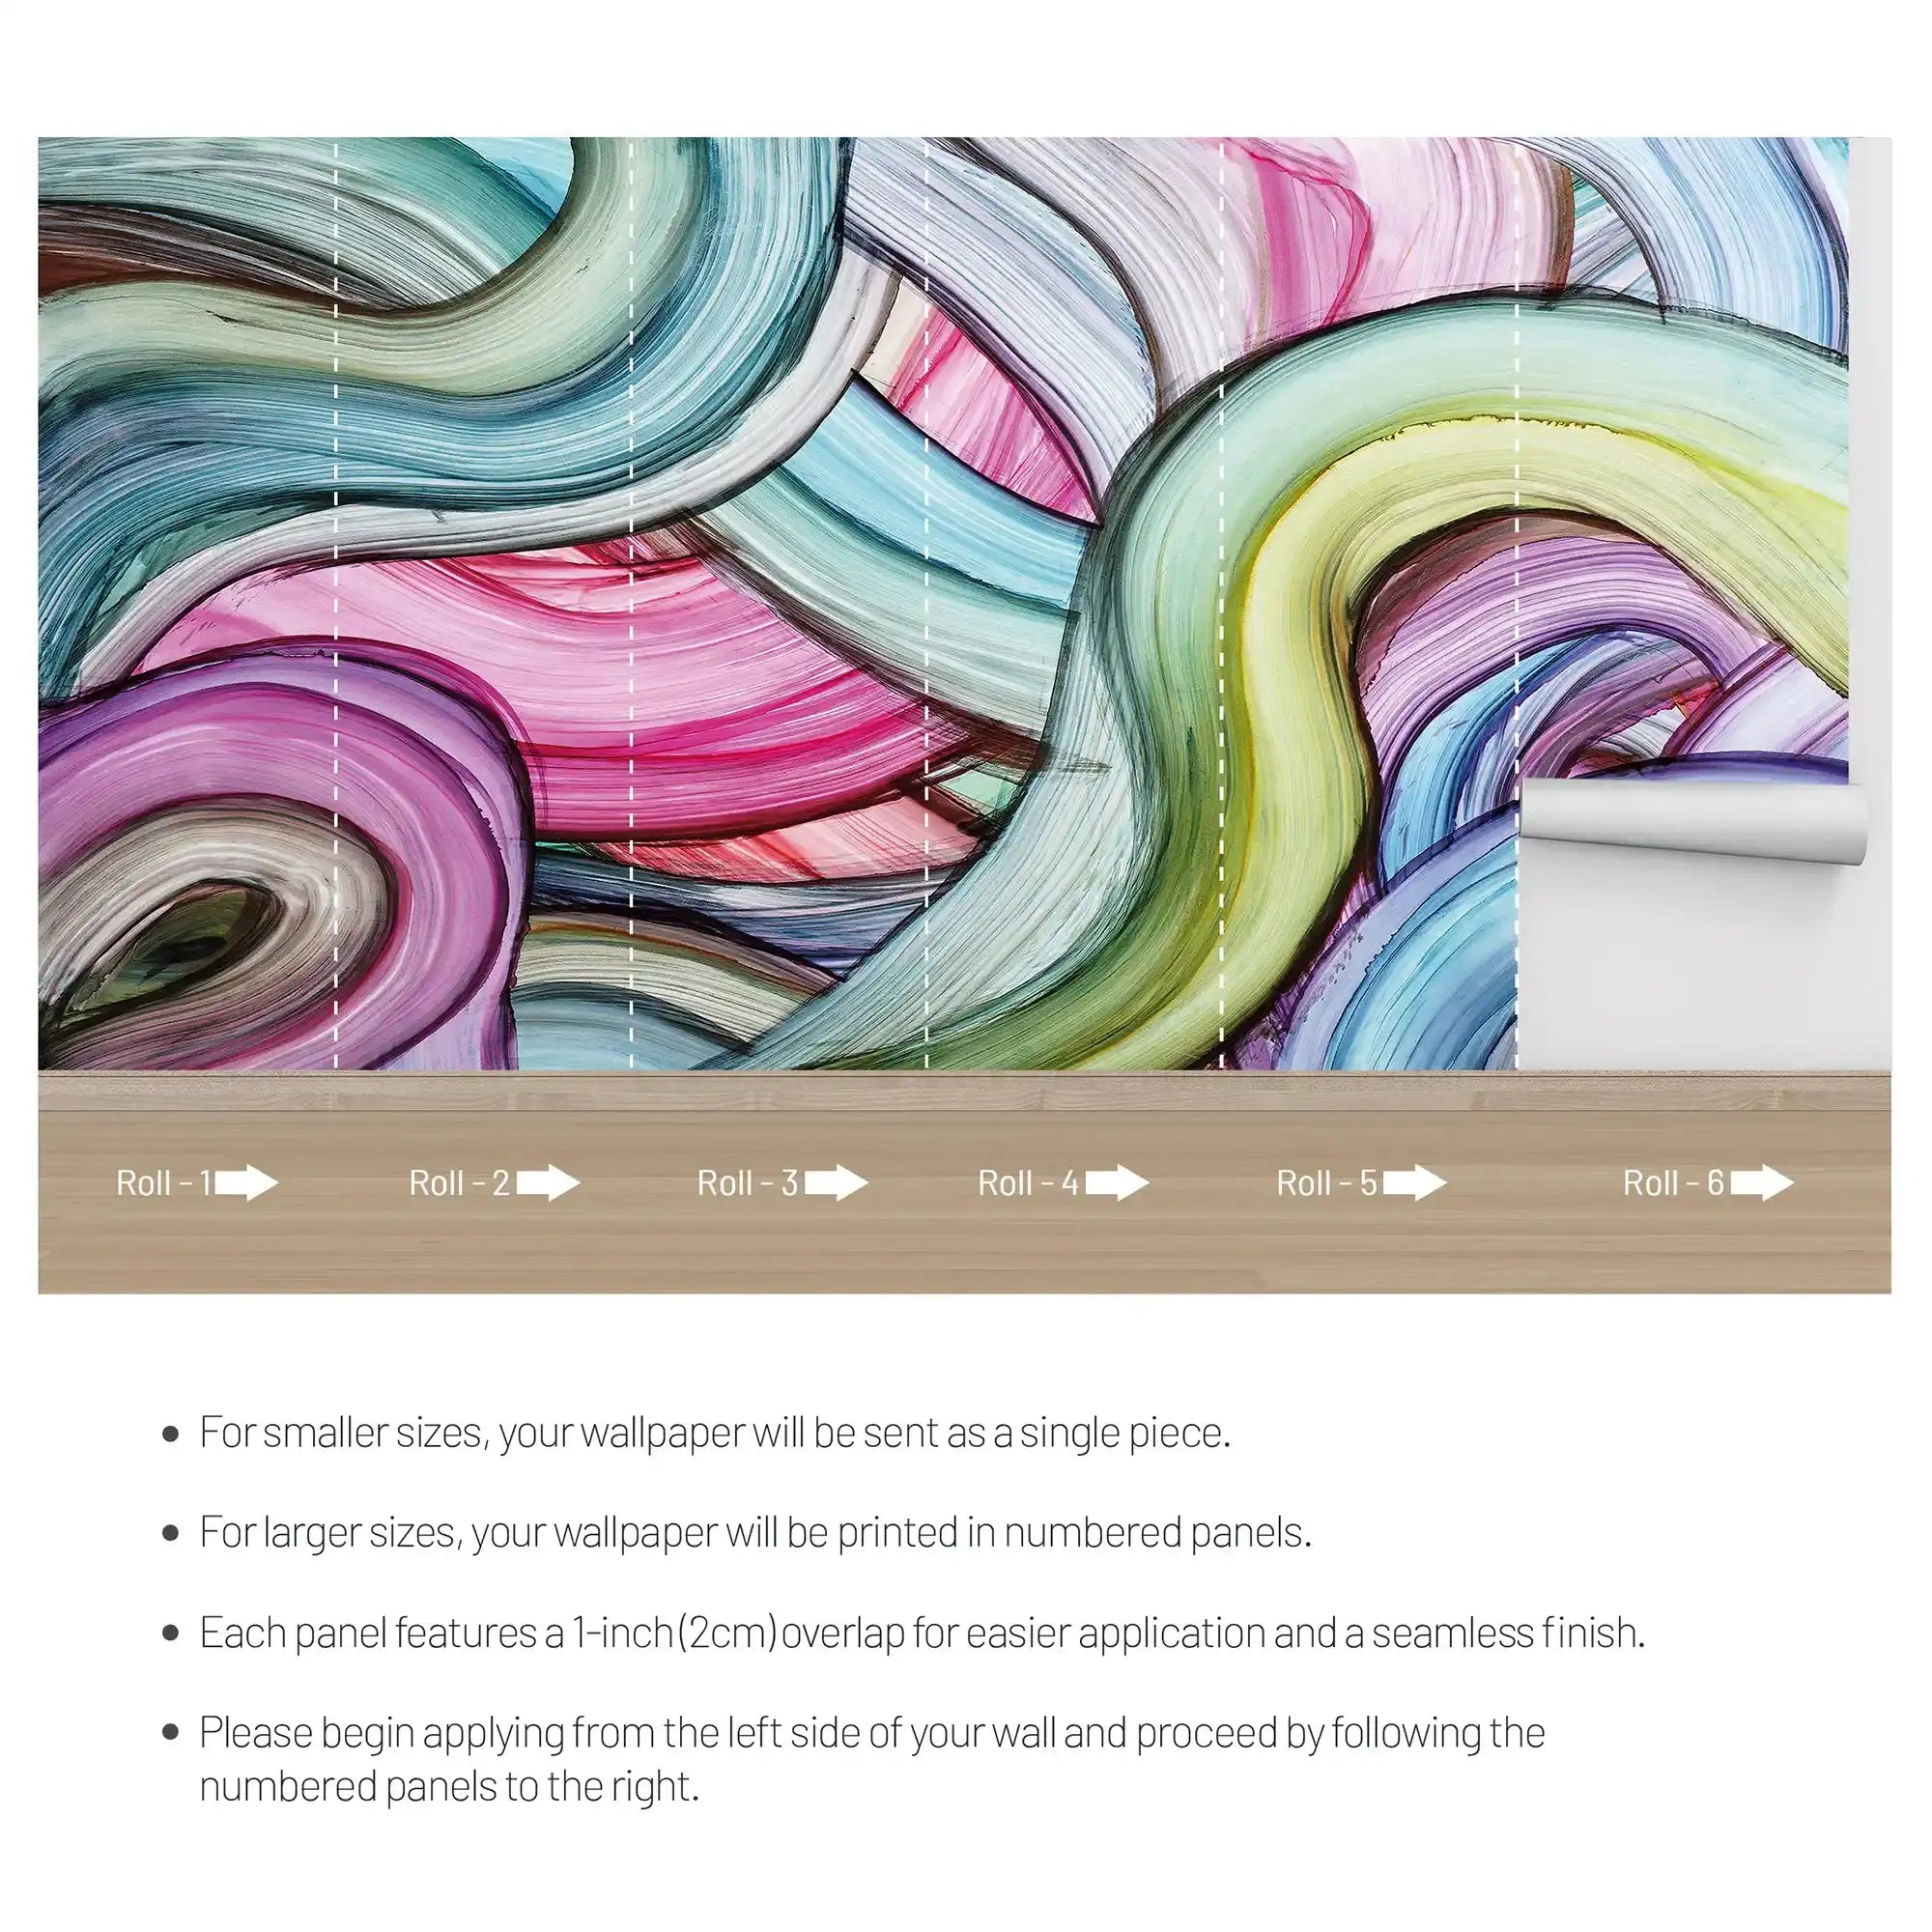 3092-D / Peelable Stickable Wallpaper with Colorful Wavy Lines - Bold, Contemporary Geometric Design for Any Room - Artevella